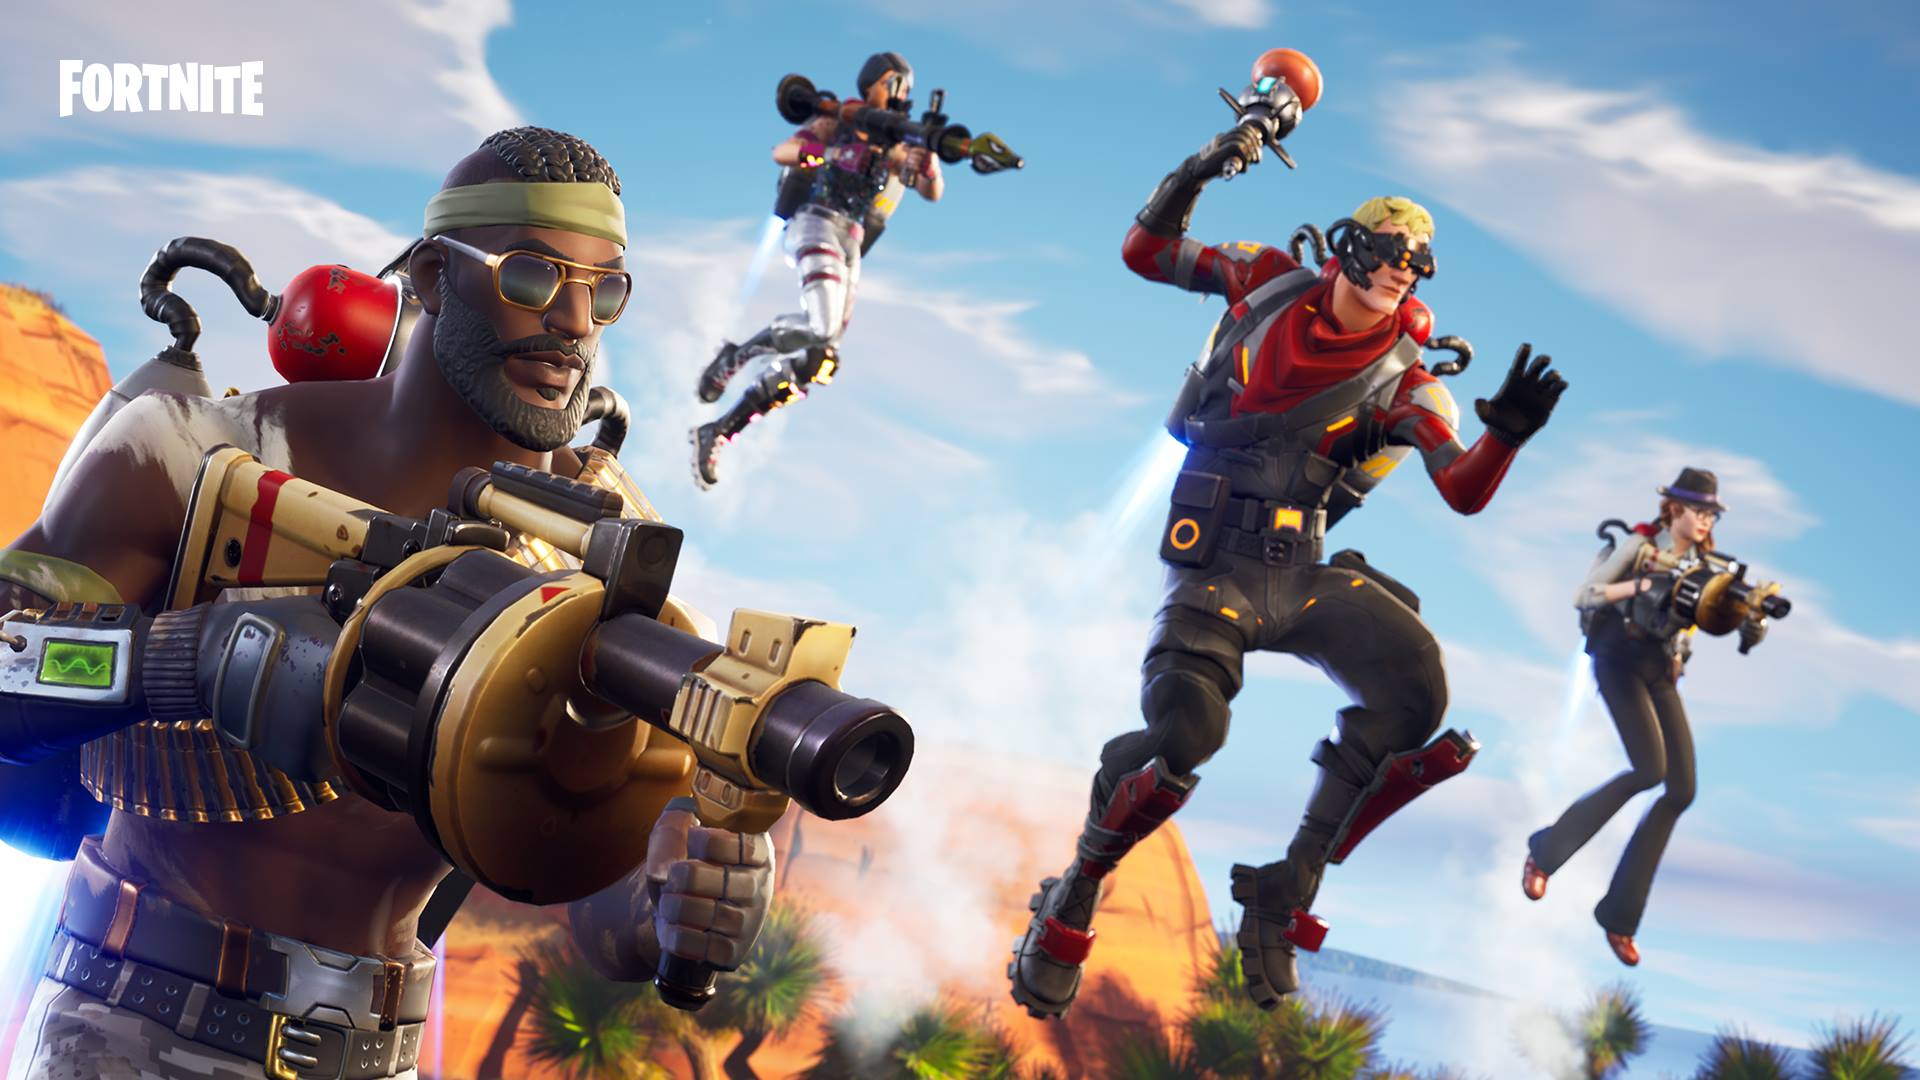 flugt lomme Sjov Fortnite cross platform guide: Playing across platforms - Android Authority